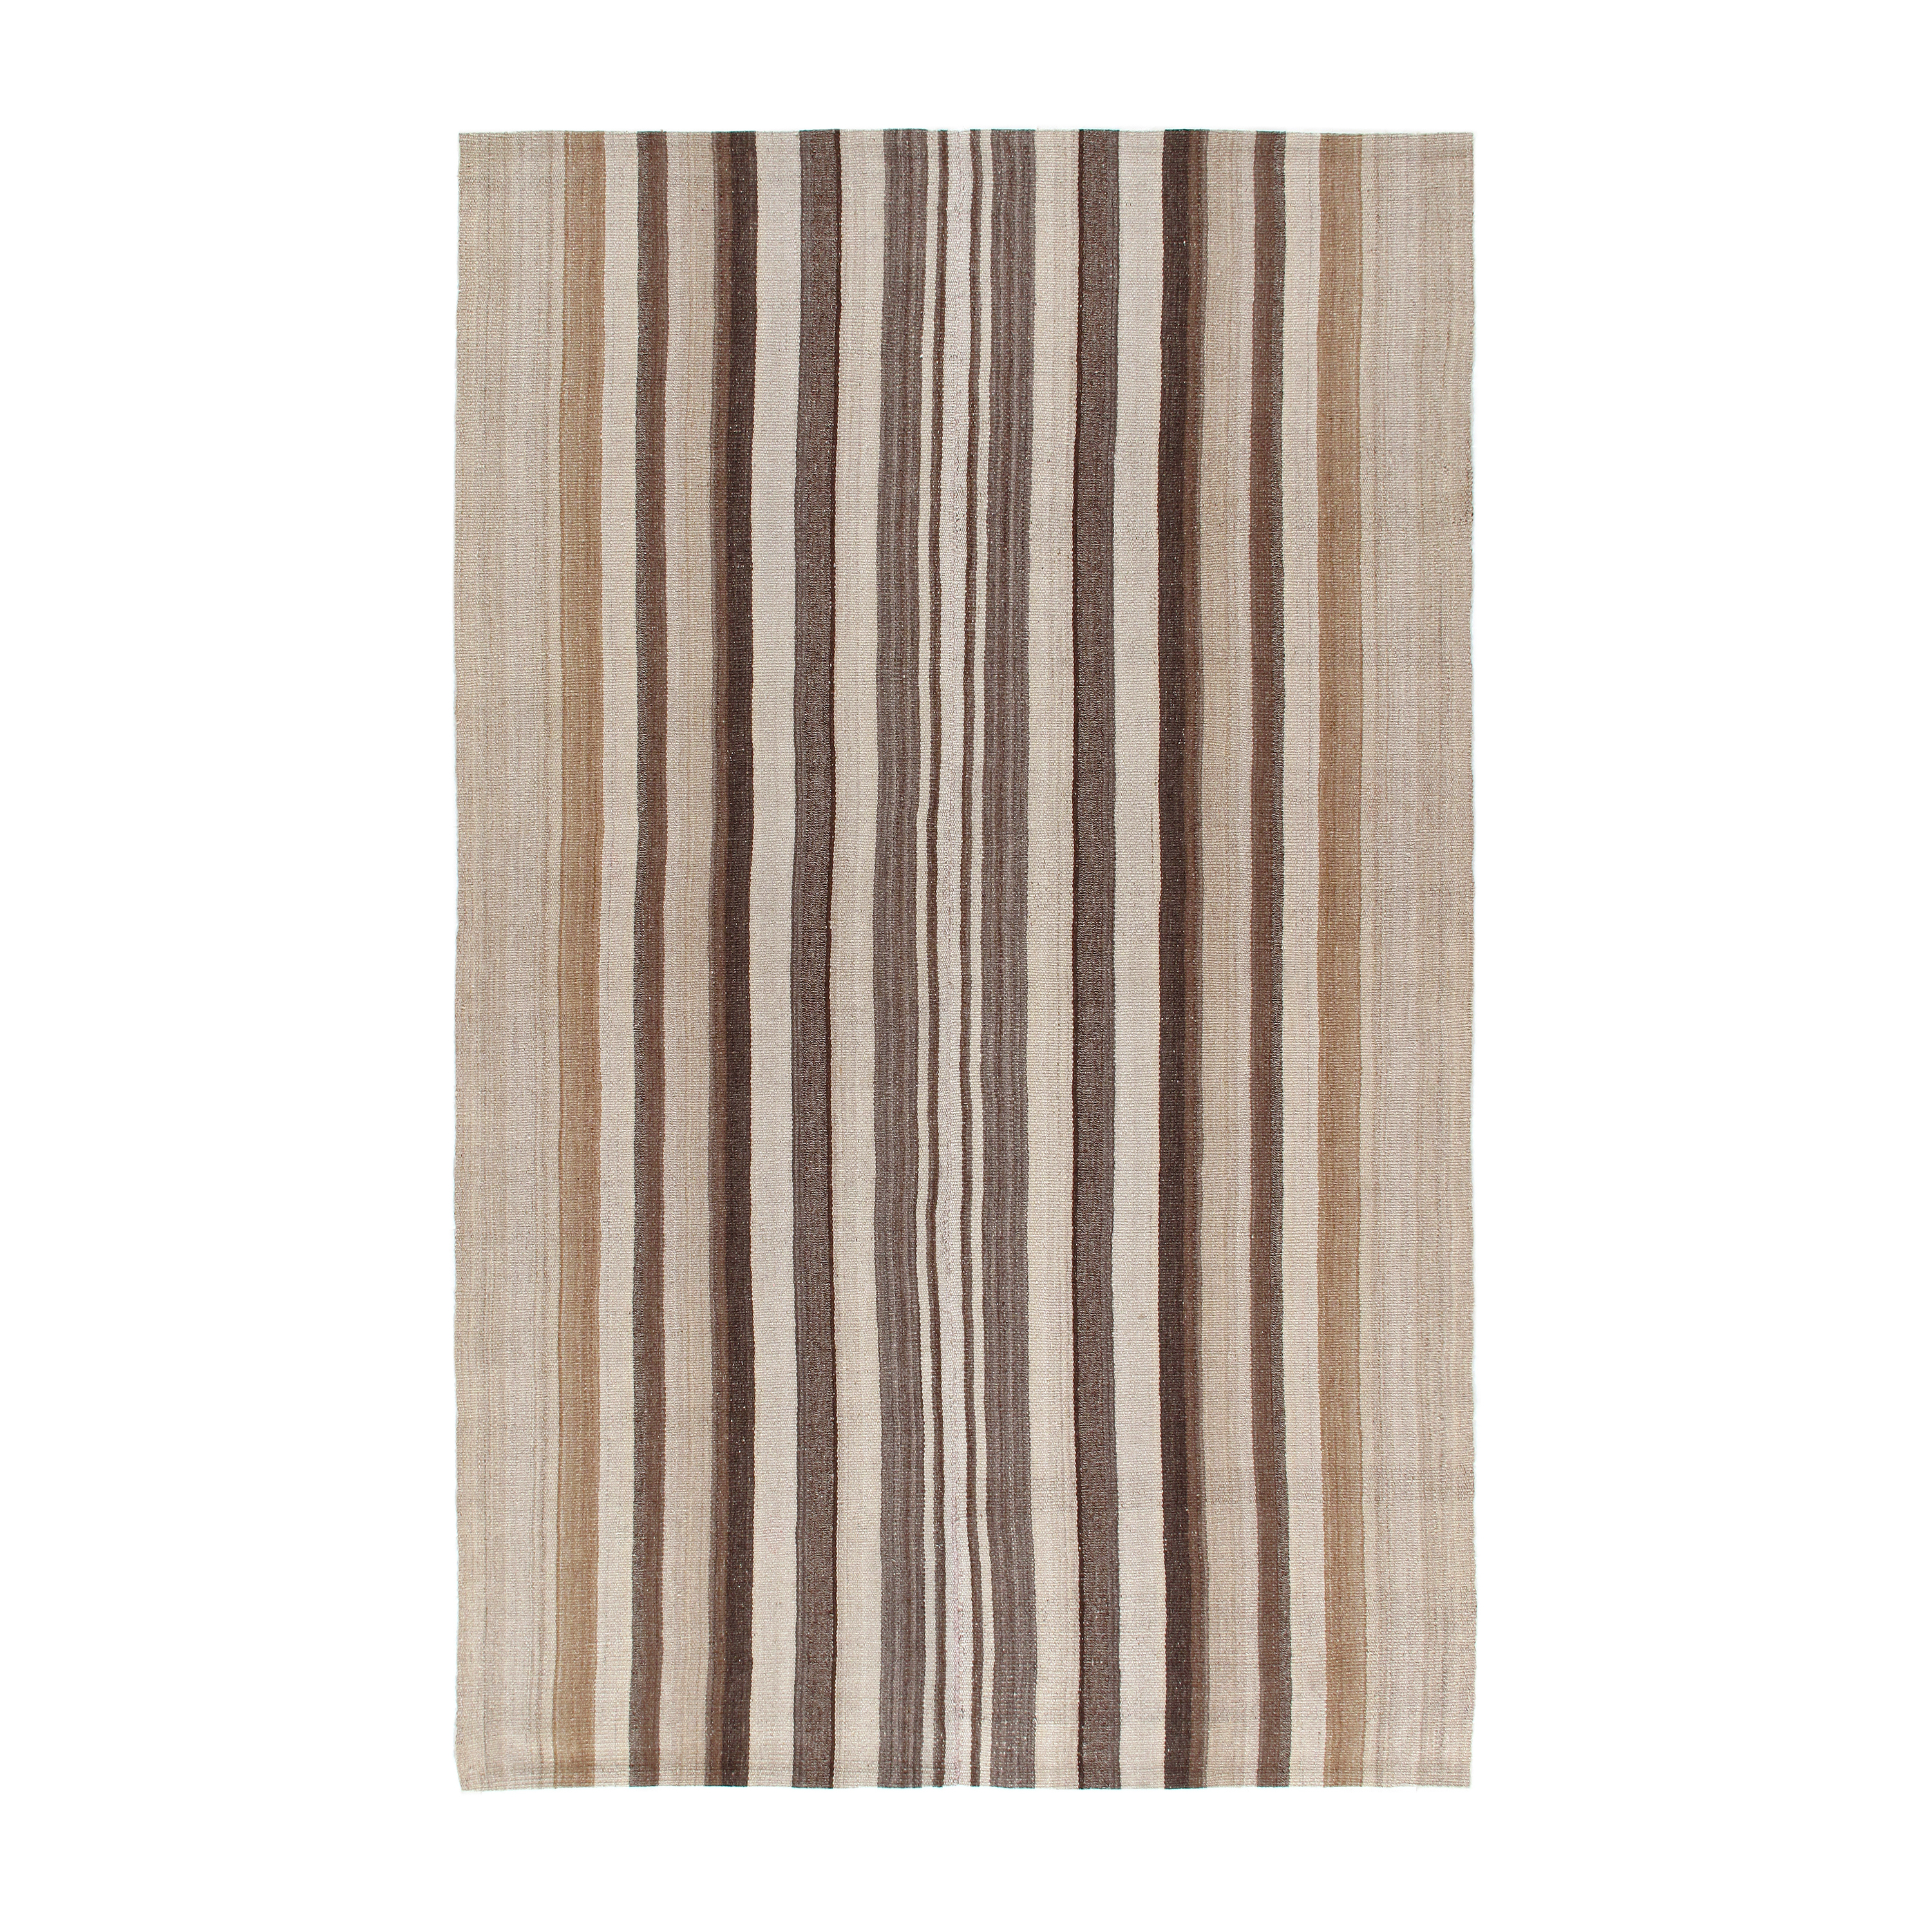 This Pelas rug is hand-woven and made handspun wool.